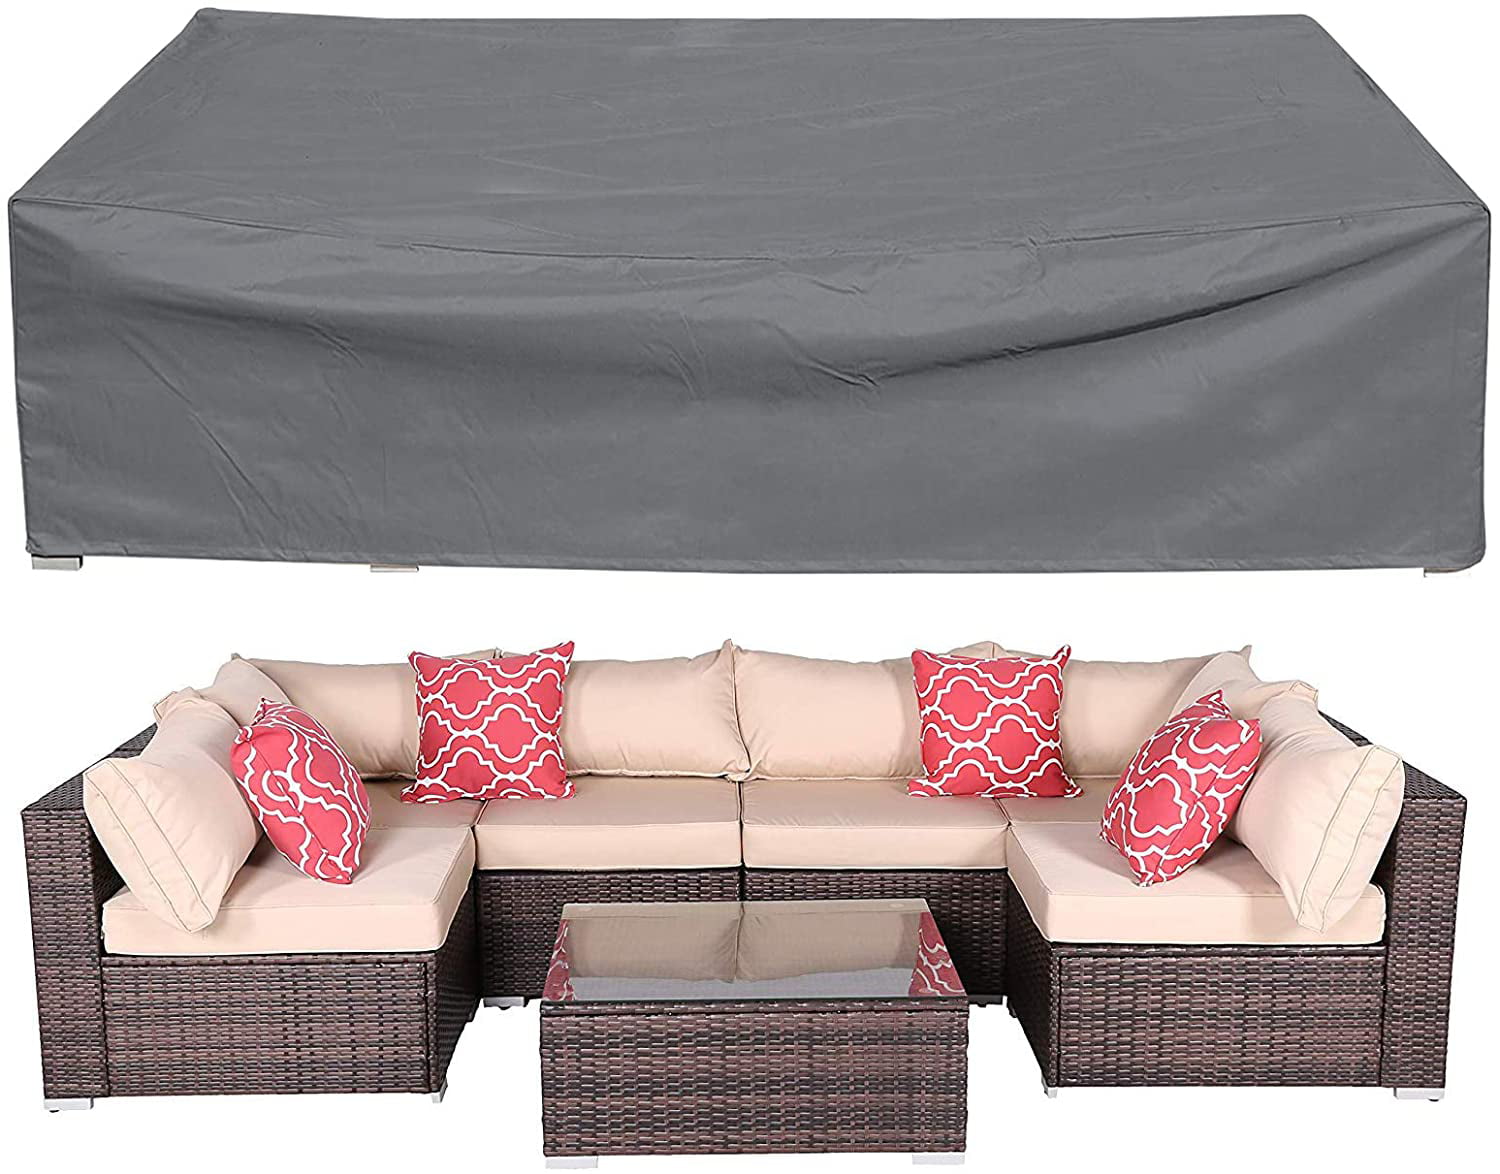 WATERPROOF GARDEN PATIO FURNITURE SET COVERS LARGE TABLE SOFA BENCH CUBE OUTDOOR 